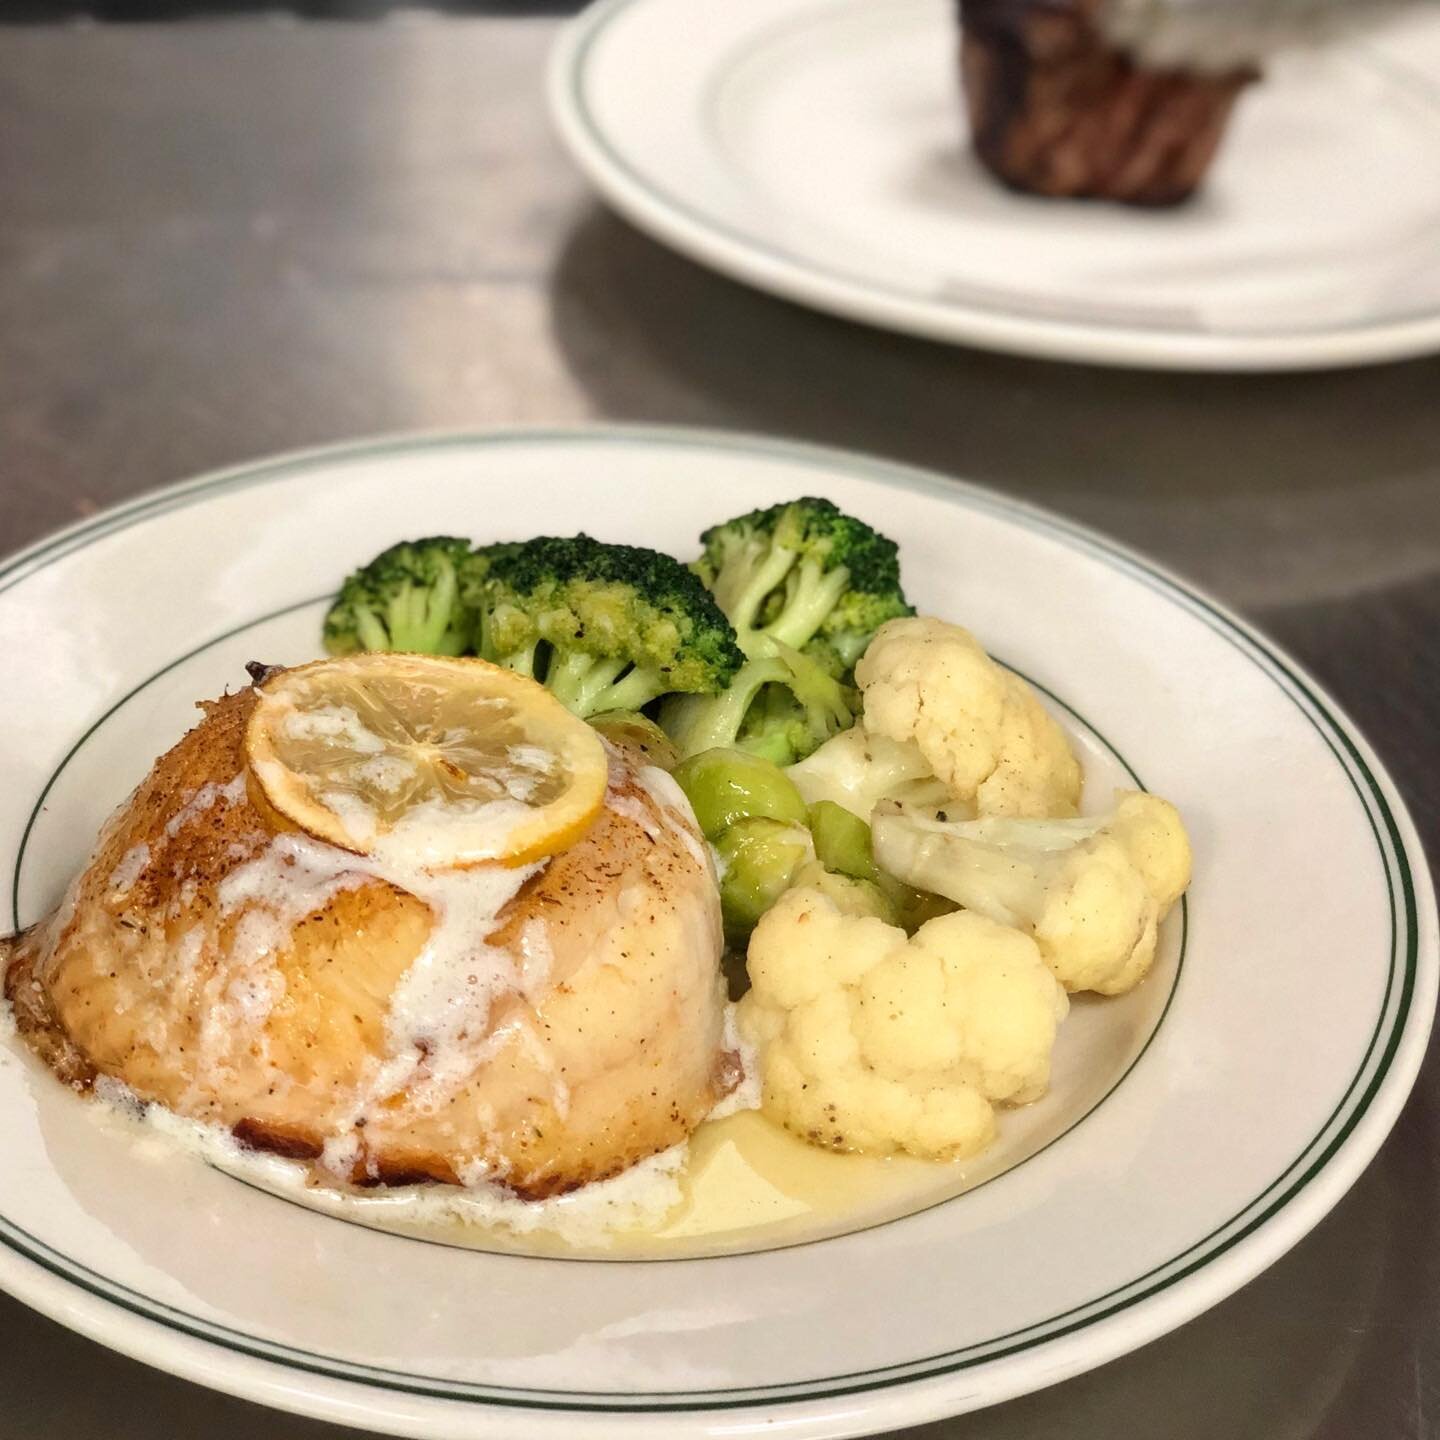 Stuffed Flounder 🐟 We don&rsquo;t get to have this special often, so you don&rsquo;t want to miss it tonight!
For reservations, call 601.957.8000